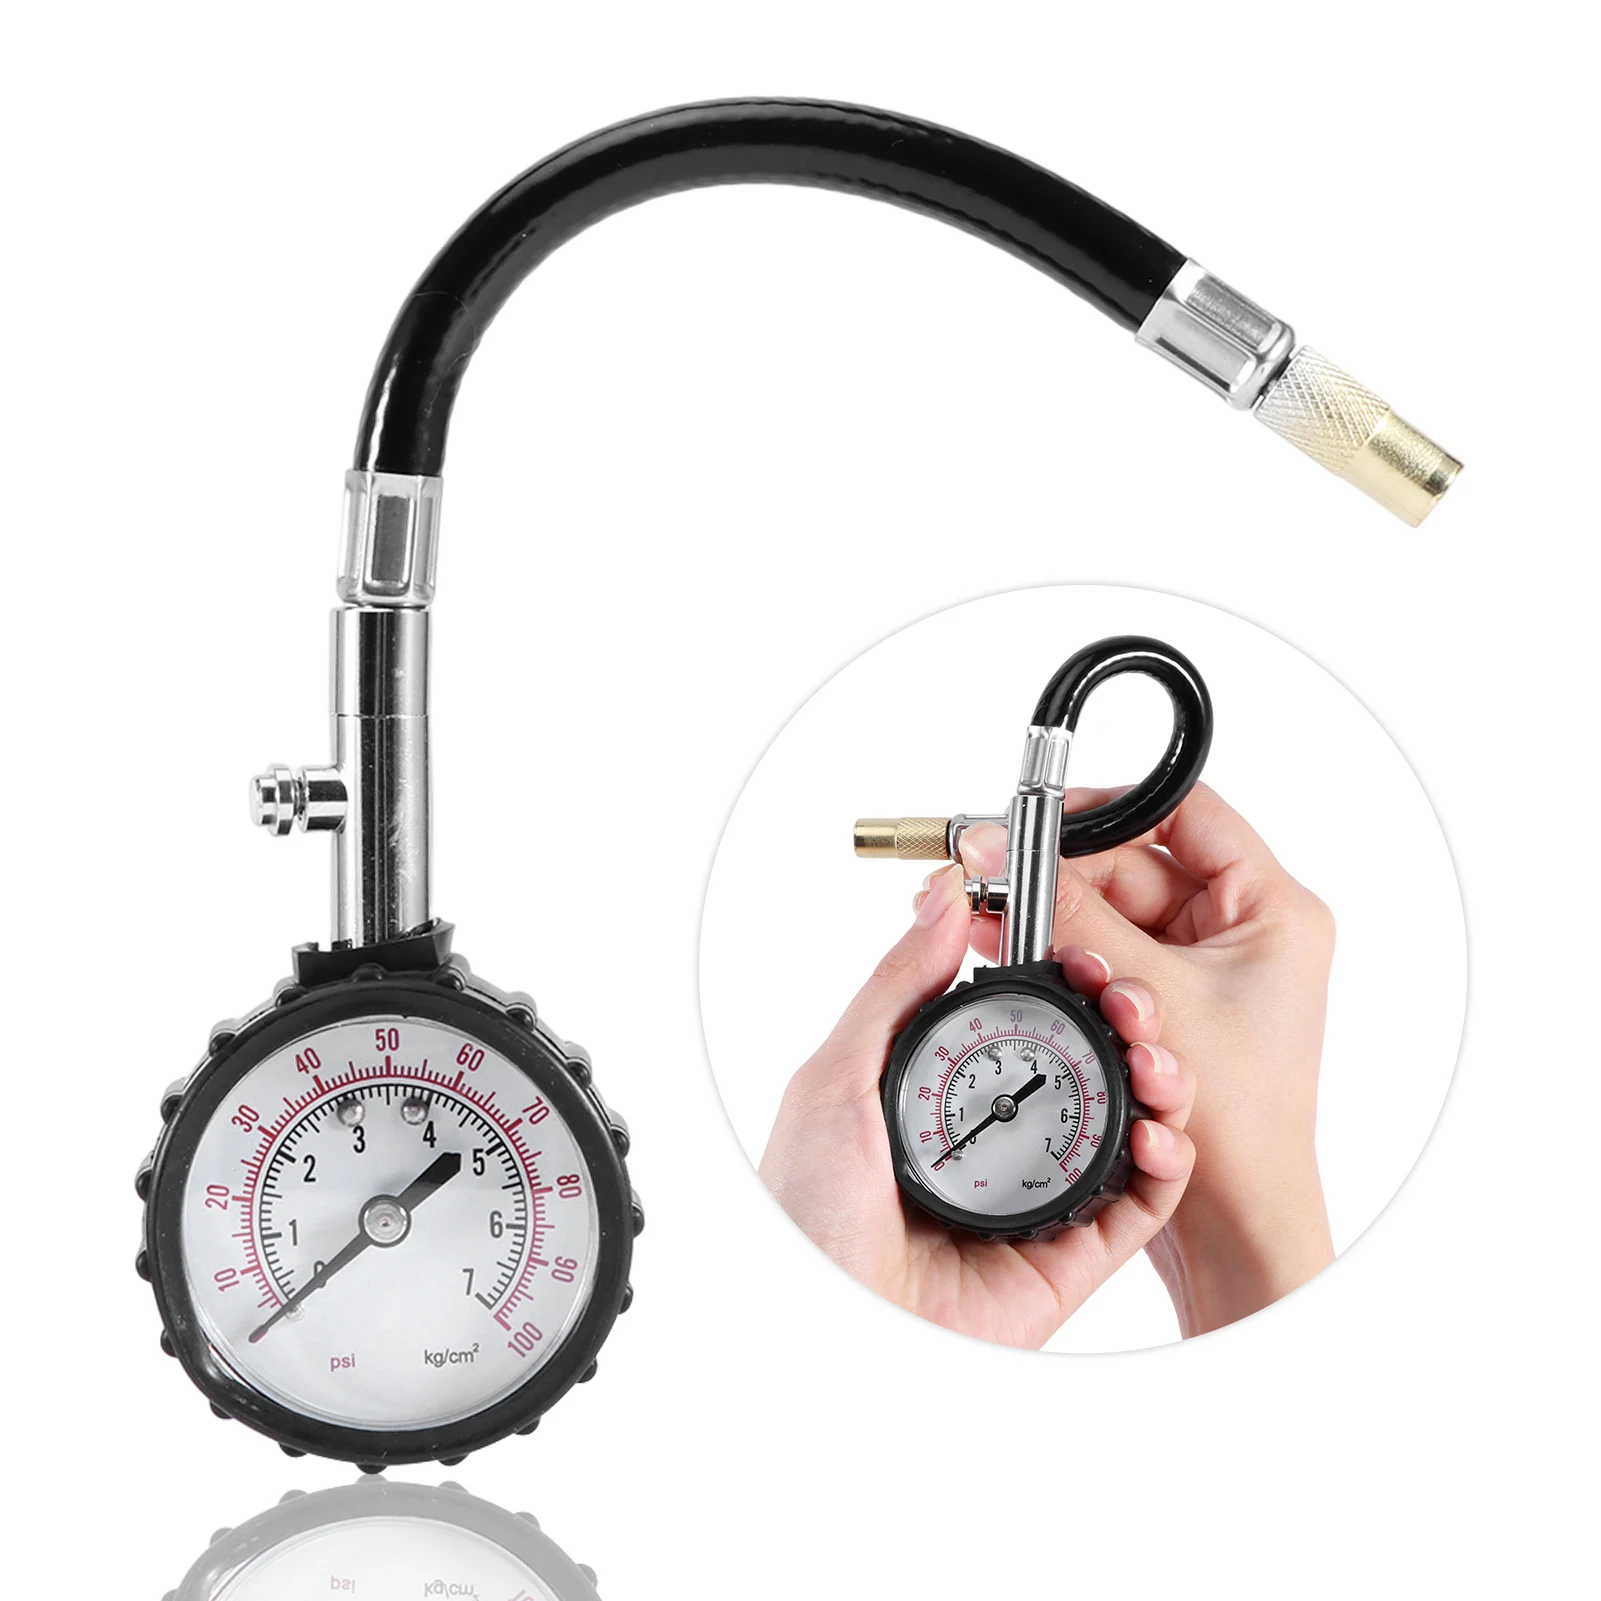 

Bicycle Easy Read Compact Professional Flexible Hose Tire Pressure Gauge Heavy Duty With Tube Car Truck Large Dial Accurate